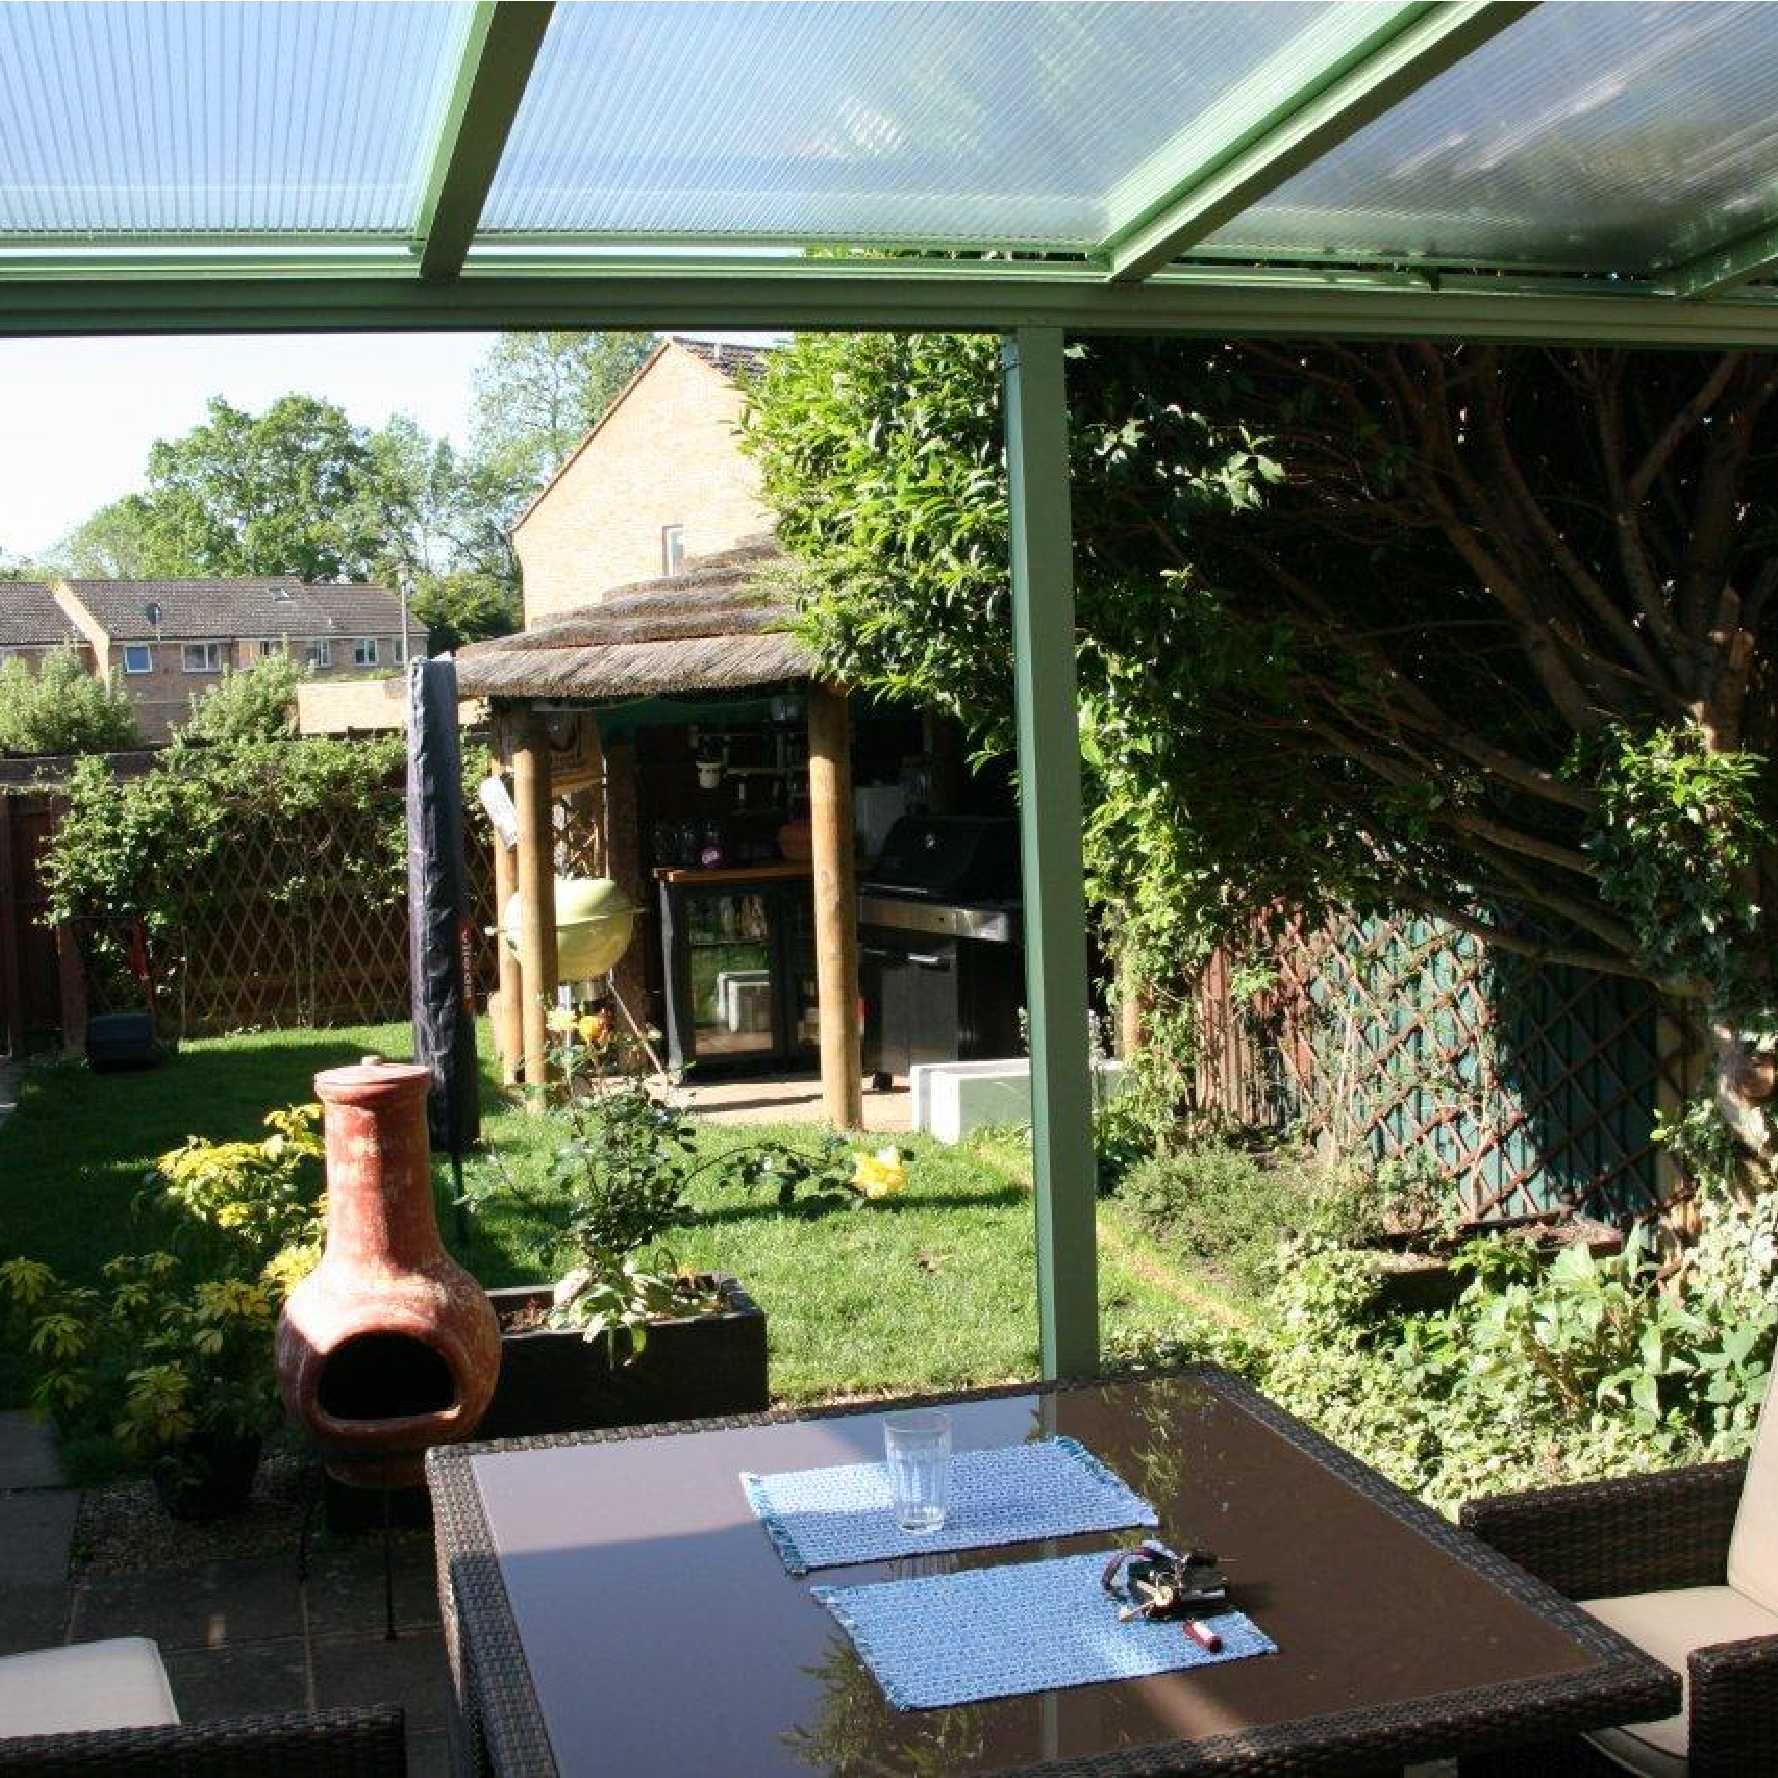 Affordable Omega Smart Lean-To Canopy, White with 16mm Polycarbonate Glazing - 4.8m (W) x 4.5m (P), (3) Supporting Posts